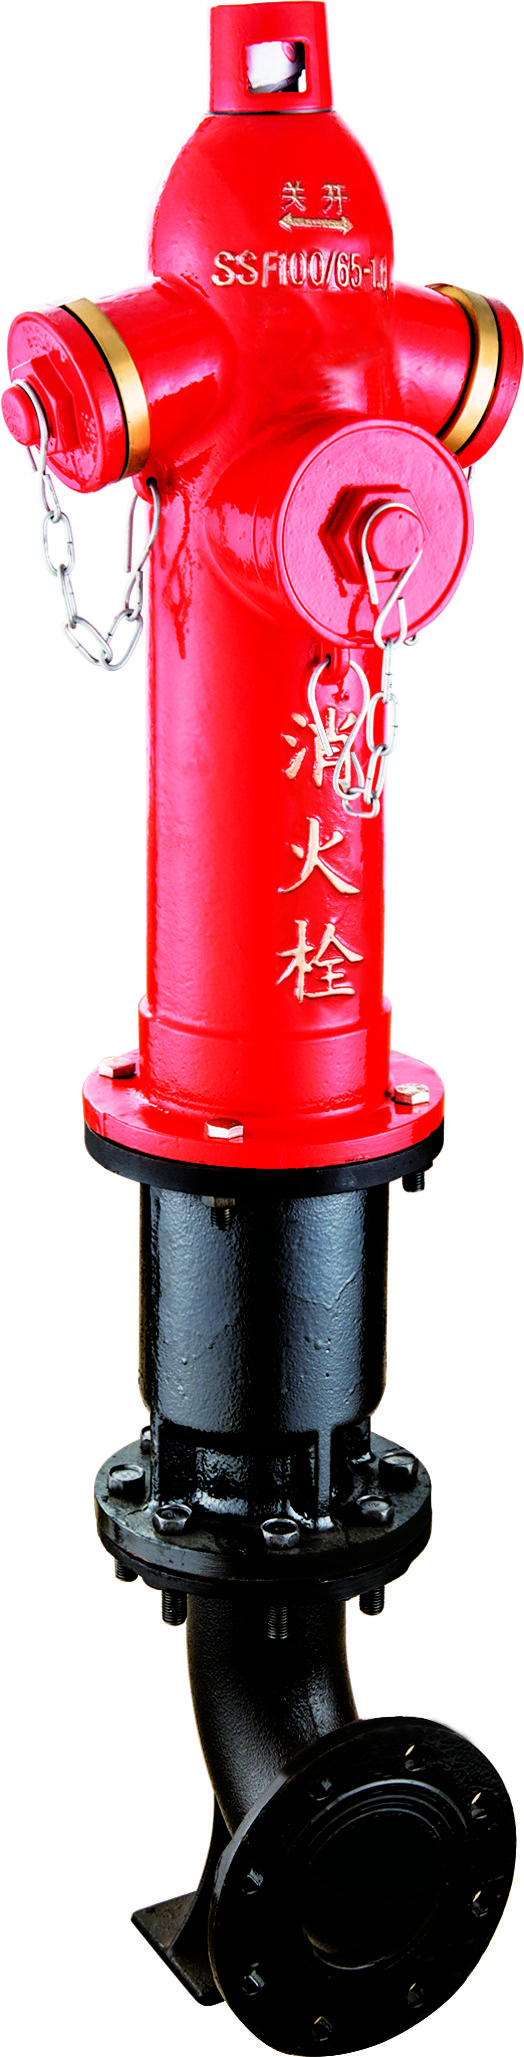 What is the difference between indoor and outdoor fire hydrants?